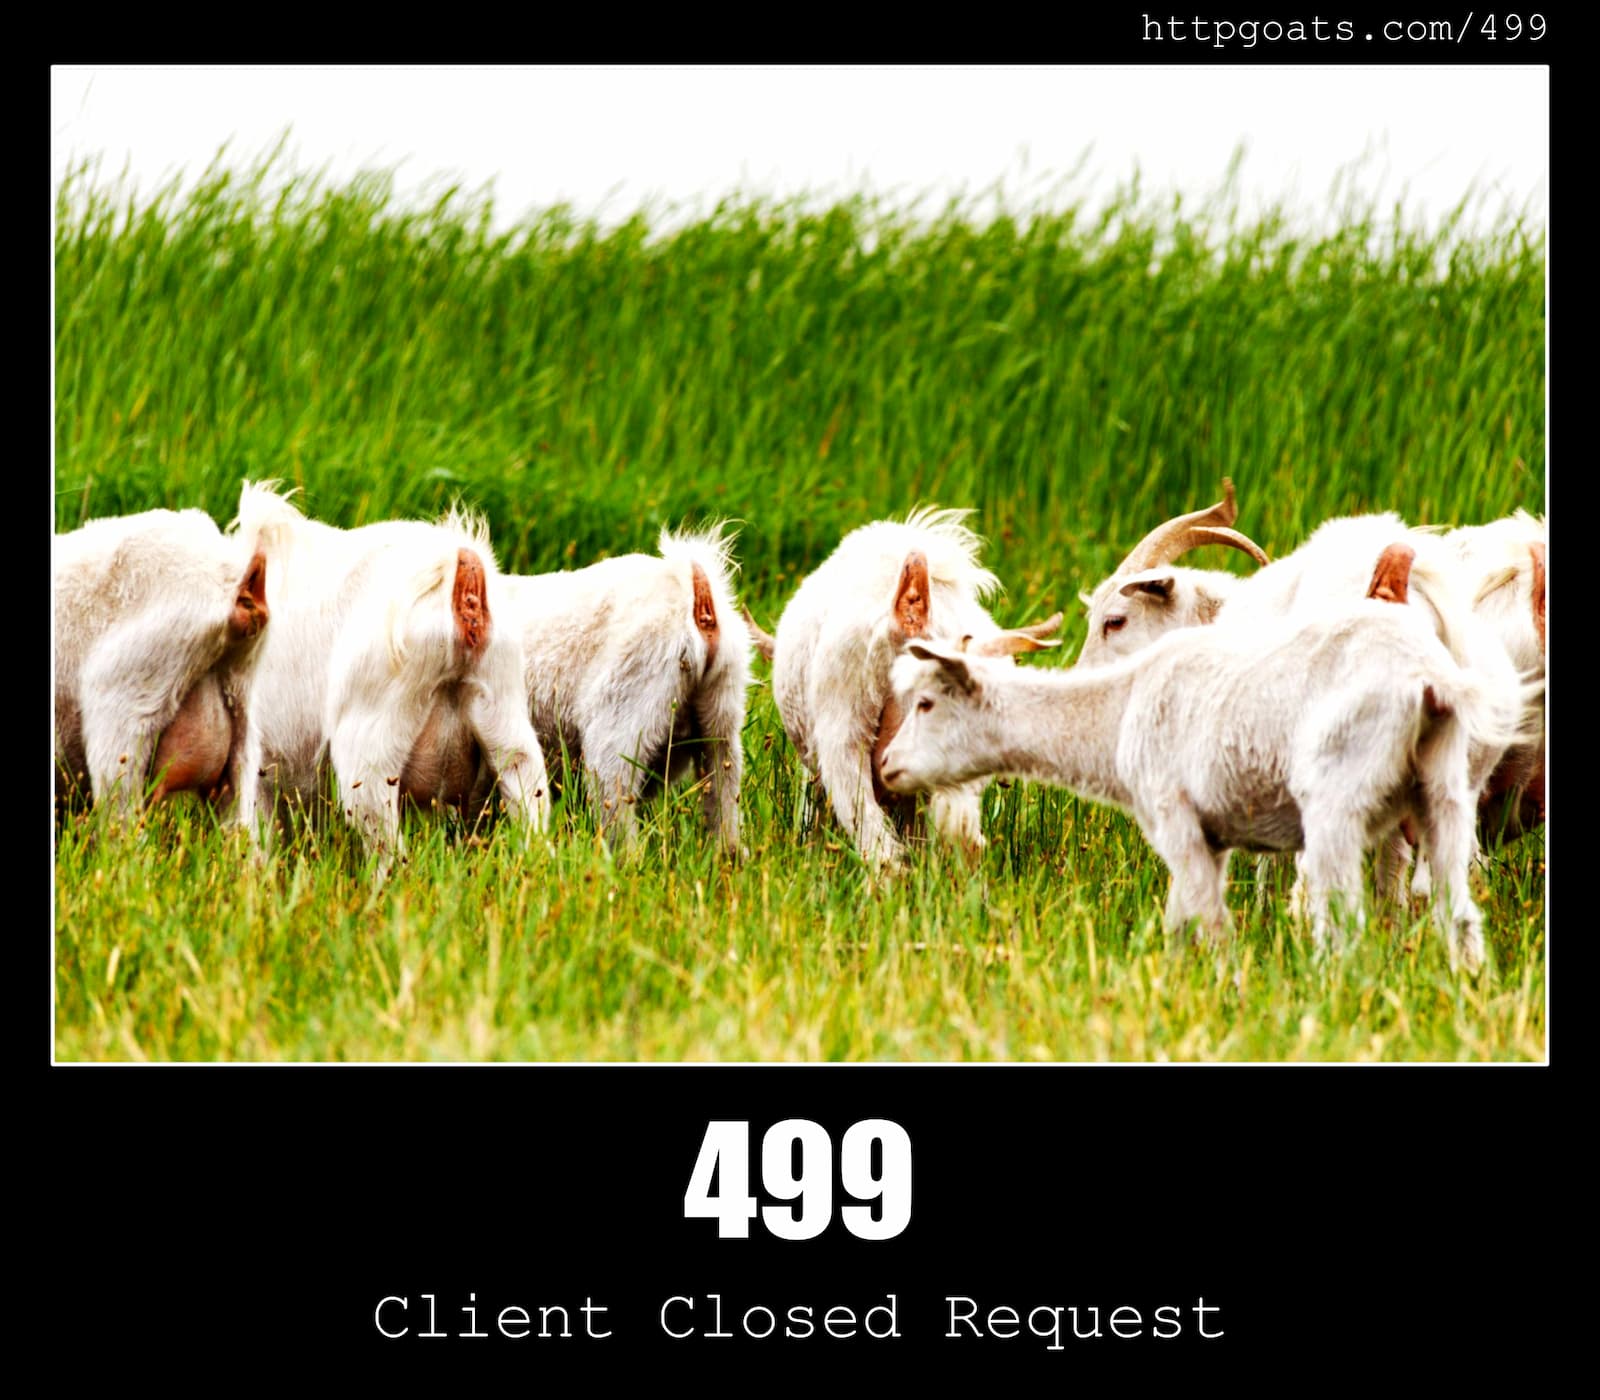 HTTP Status Code 499 Client Closed Request & Goats